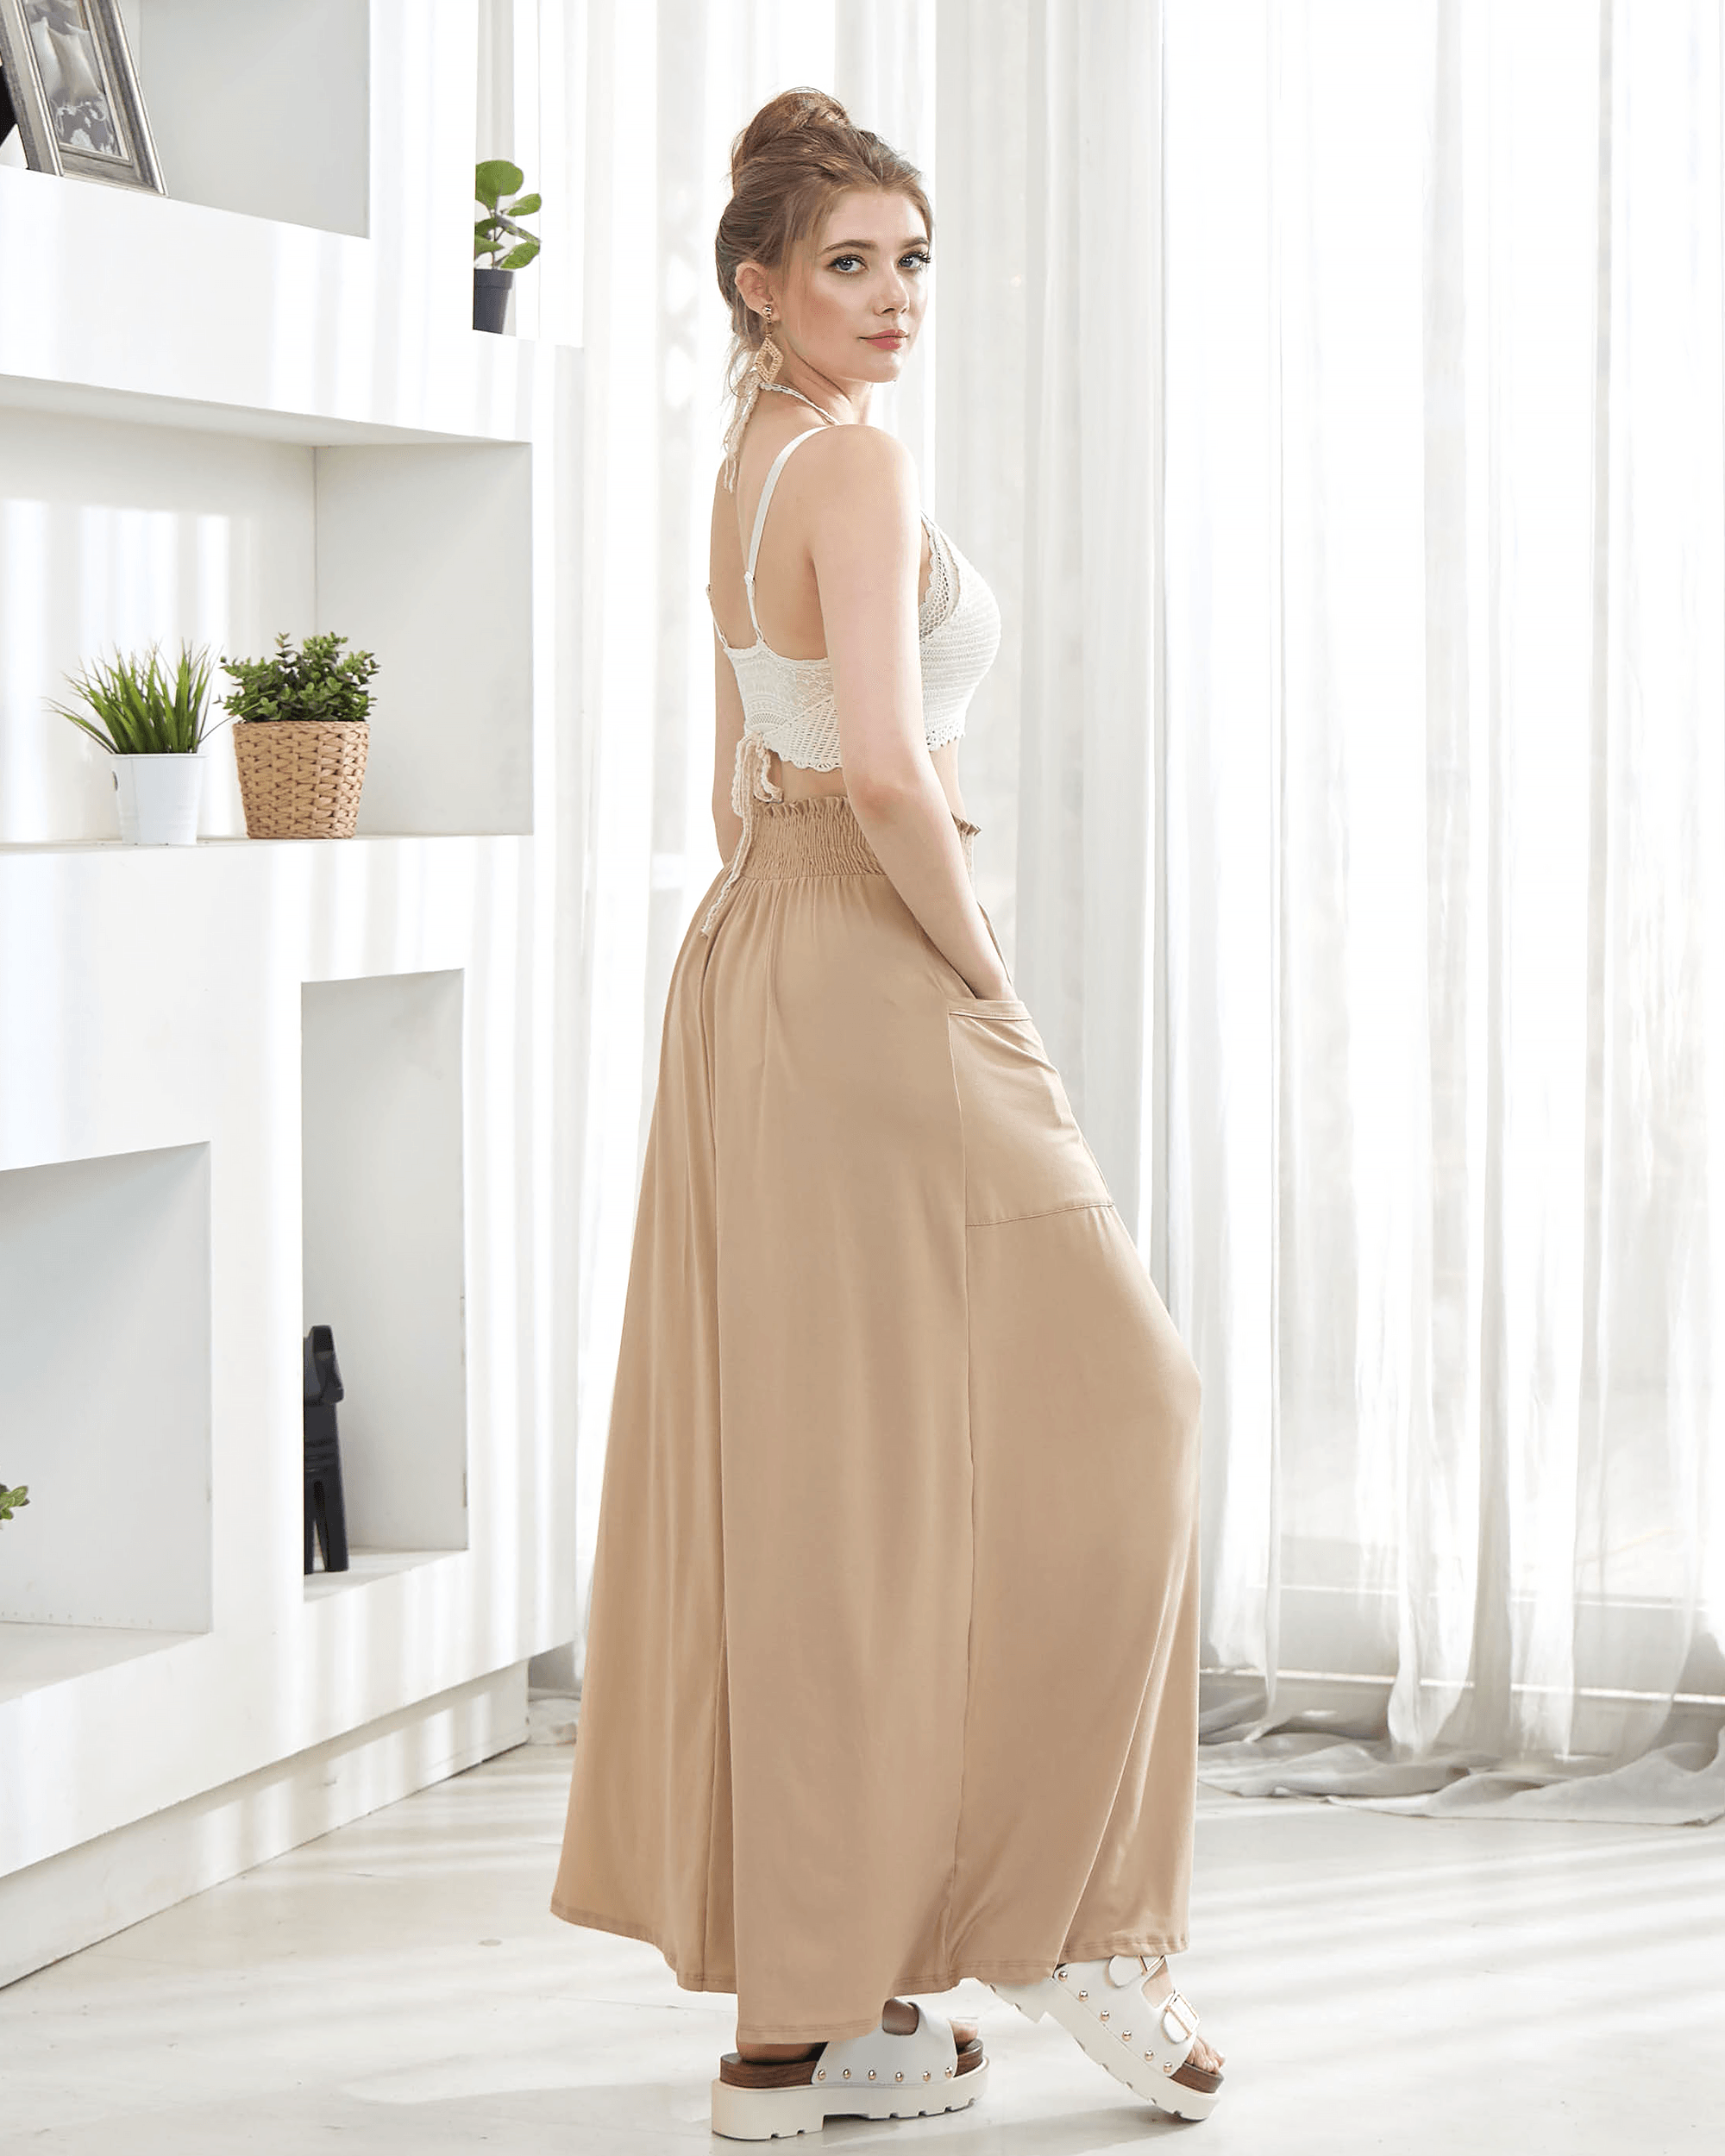 Taupe Maxi Skirt - Smocked Waist & Patched Pockets